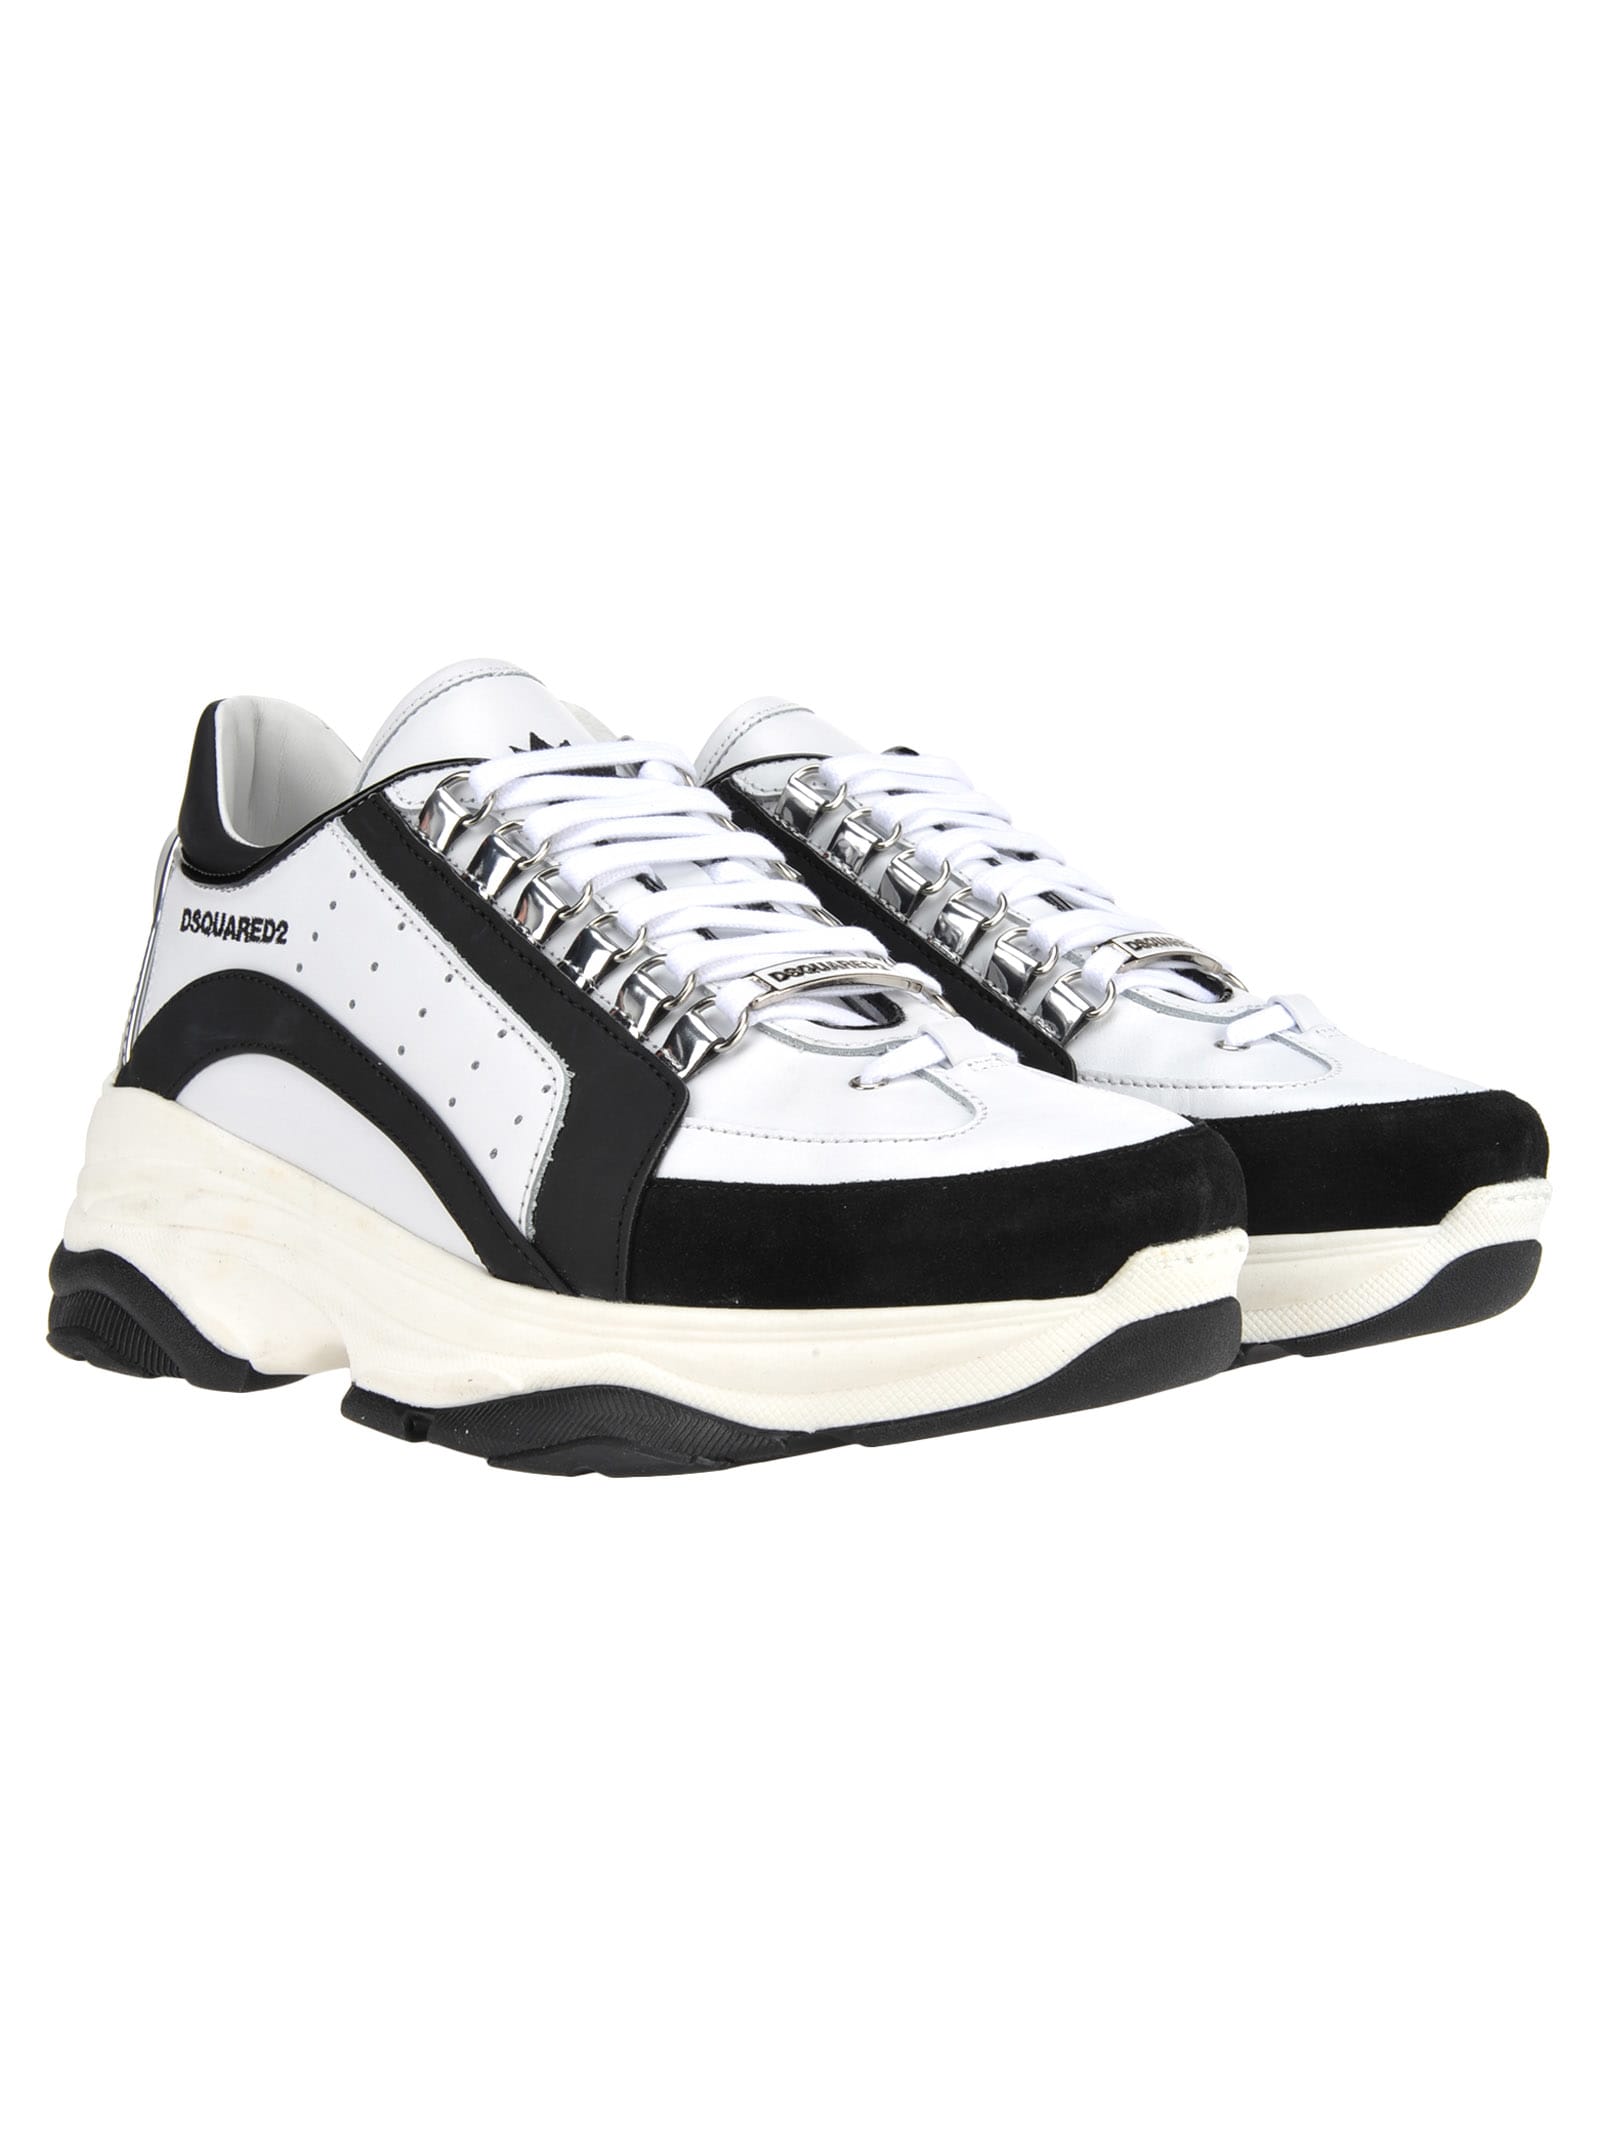 Dsquared2 D Squared Dsquared Bumpy New Sneakers - WHITE + BLACK ...